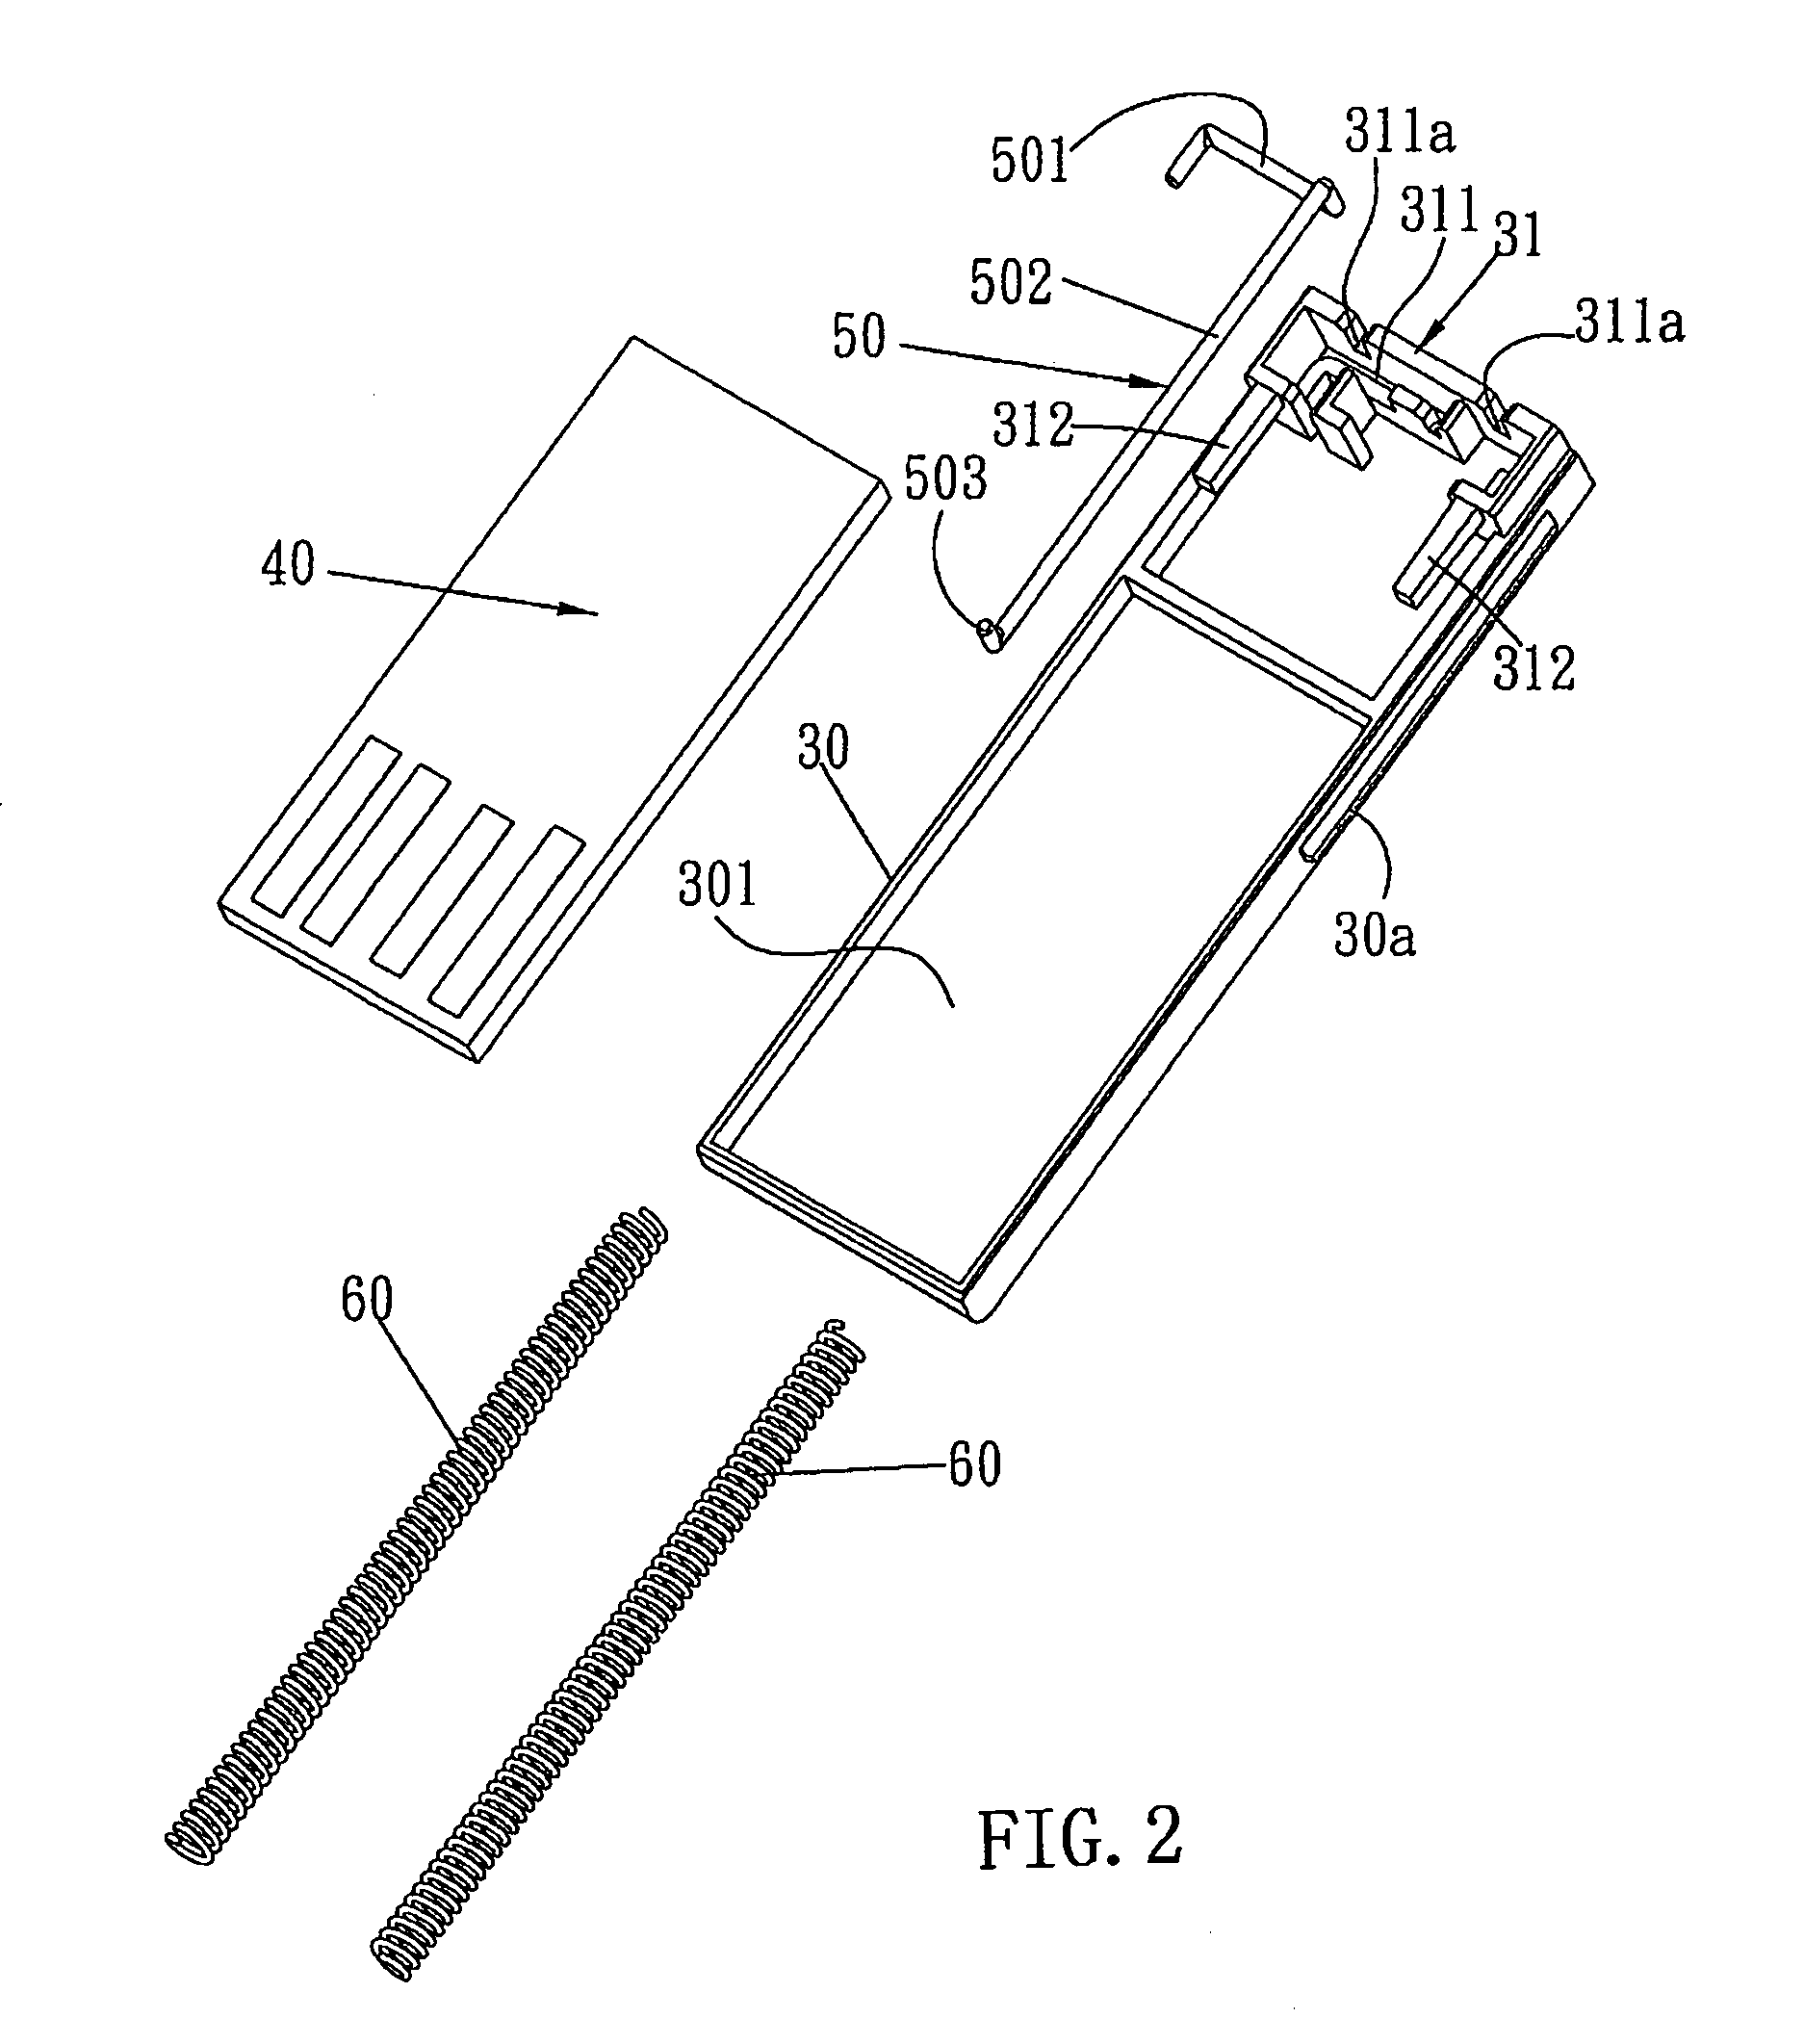 USB connector extension/retraction device for USB flash drive